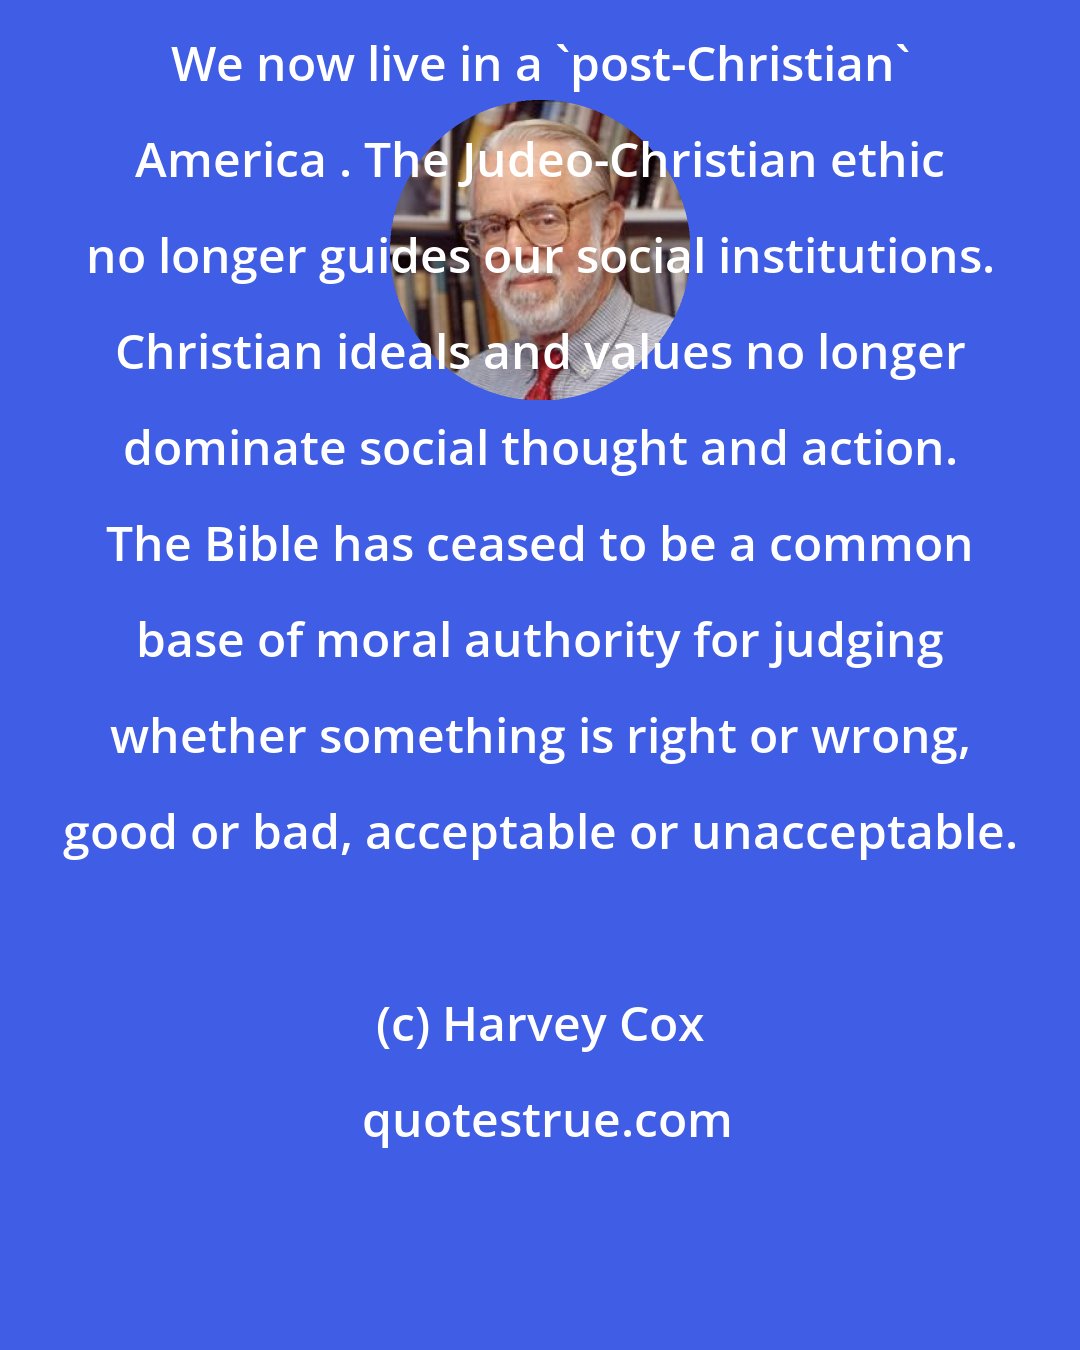 Harvey Cox: We now live in a 'post-Christian' America . The Judeo-Christian ethic no longer guides our social institutions. Christian ideals and values no longer dominate social thought and action. The Bible has ceased to be a common base of moral authority for judging whether something is right or wrong, good or bad, acceptable or unacceptable.